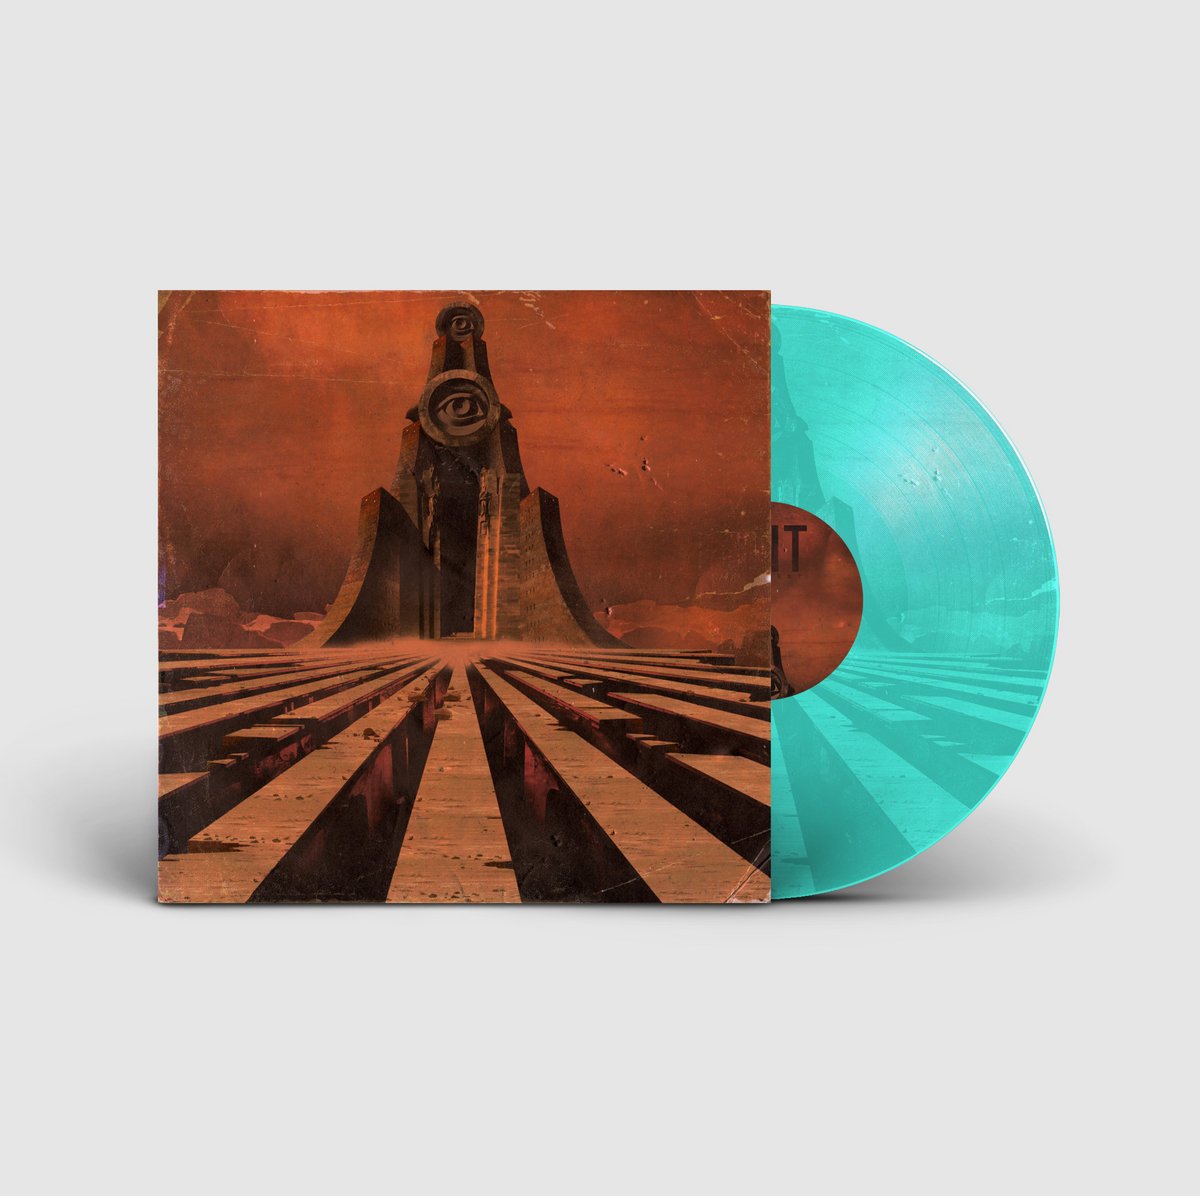 Image of ZEIT - Monument - 12"  Transparent Turquoise - One Sided Screenprinted Vinyl w/ Poster